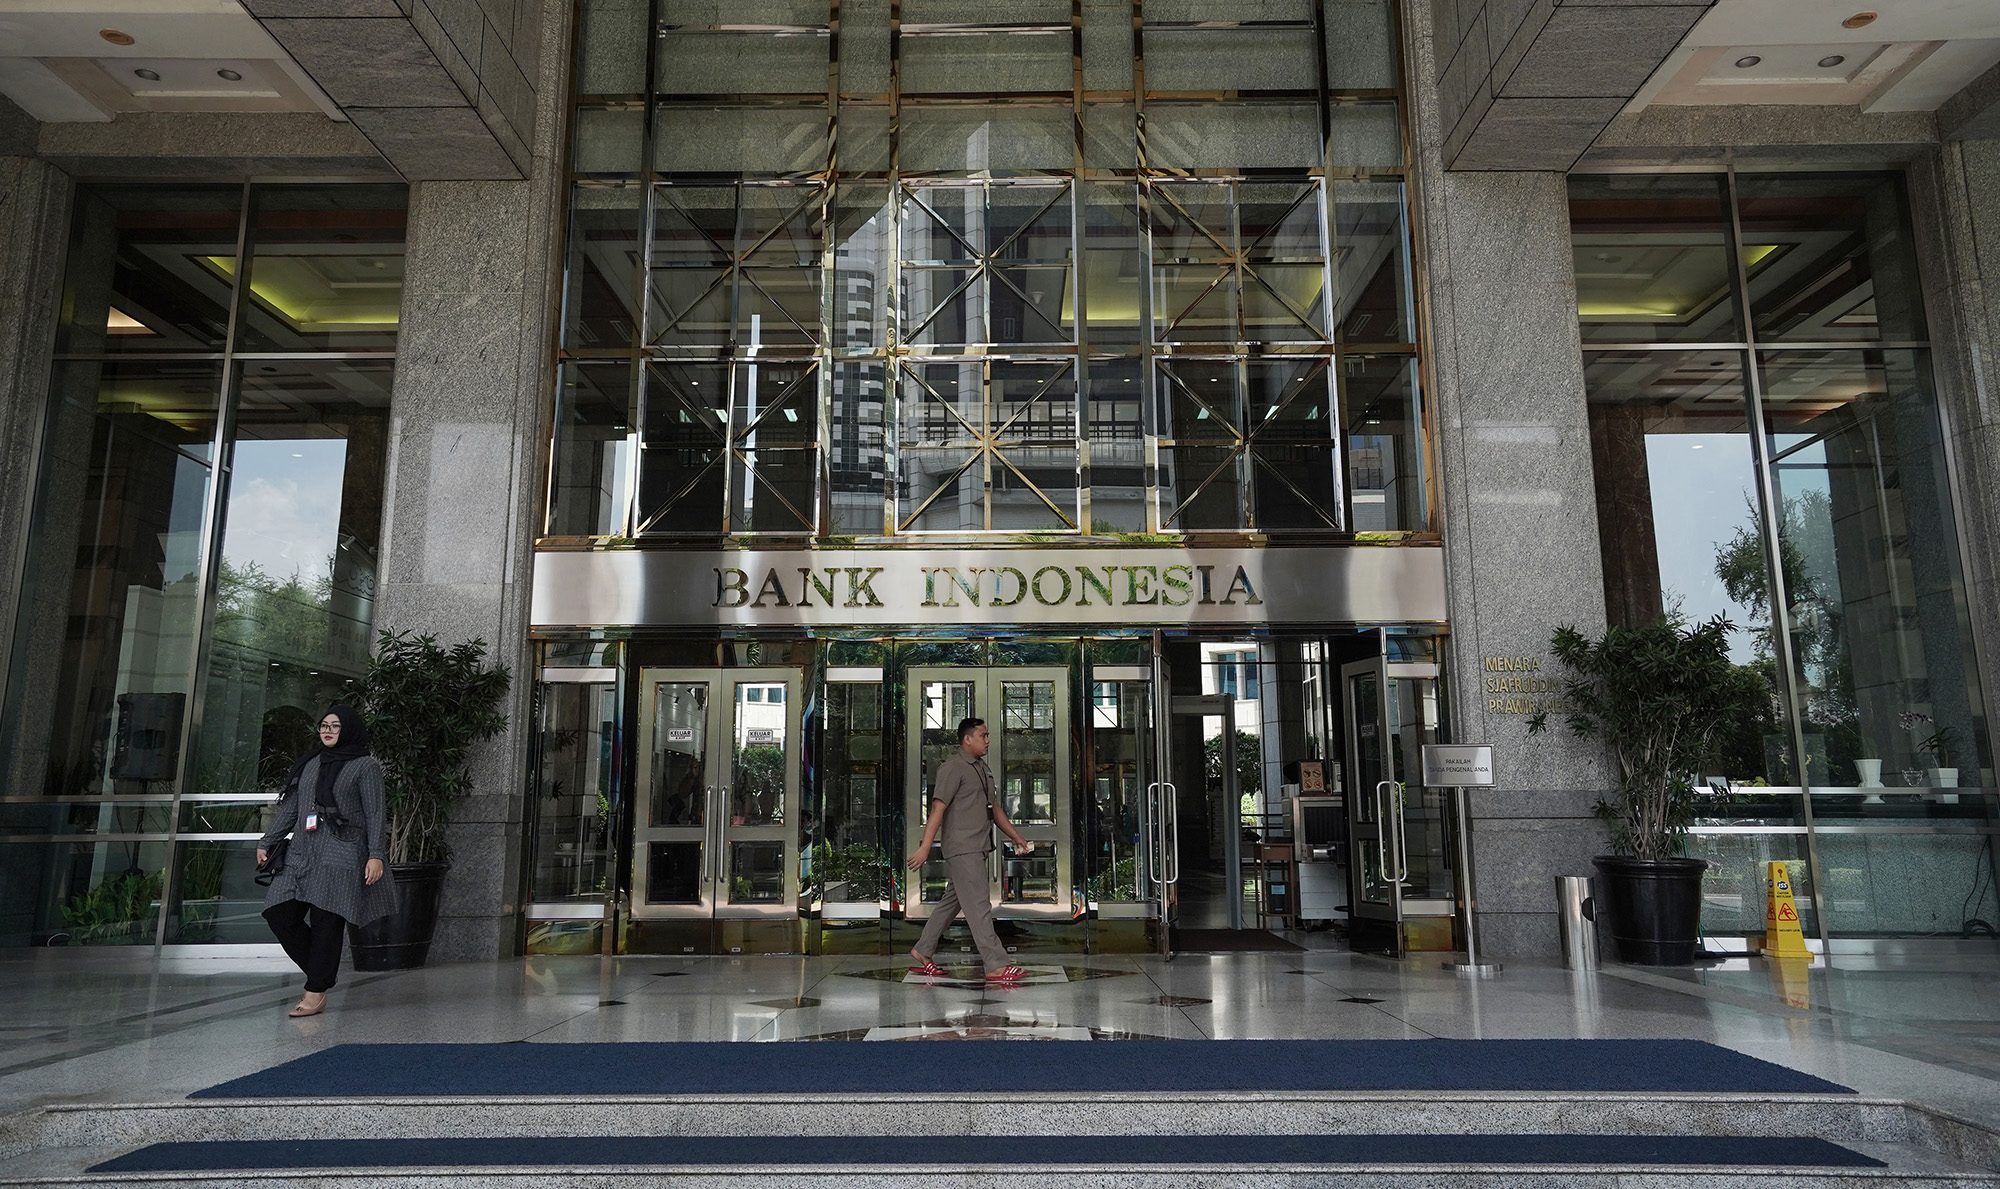 The Bank Indonesia headquarters in Jakarta.